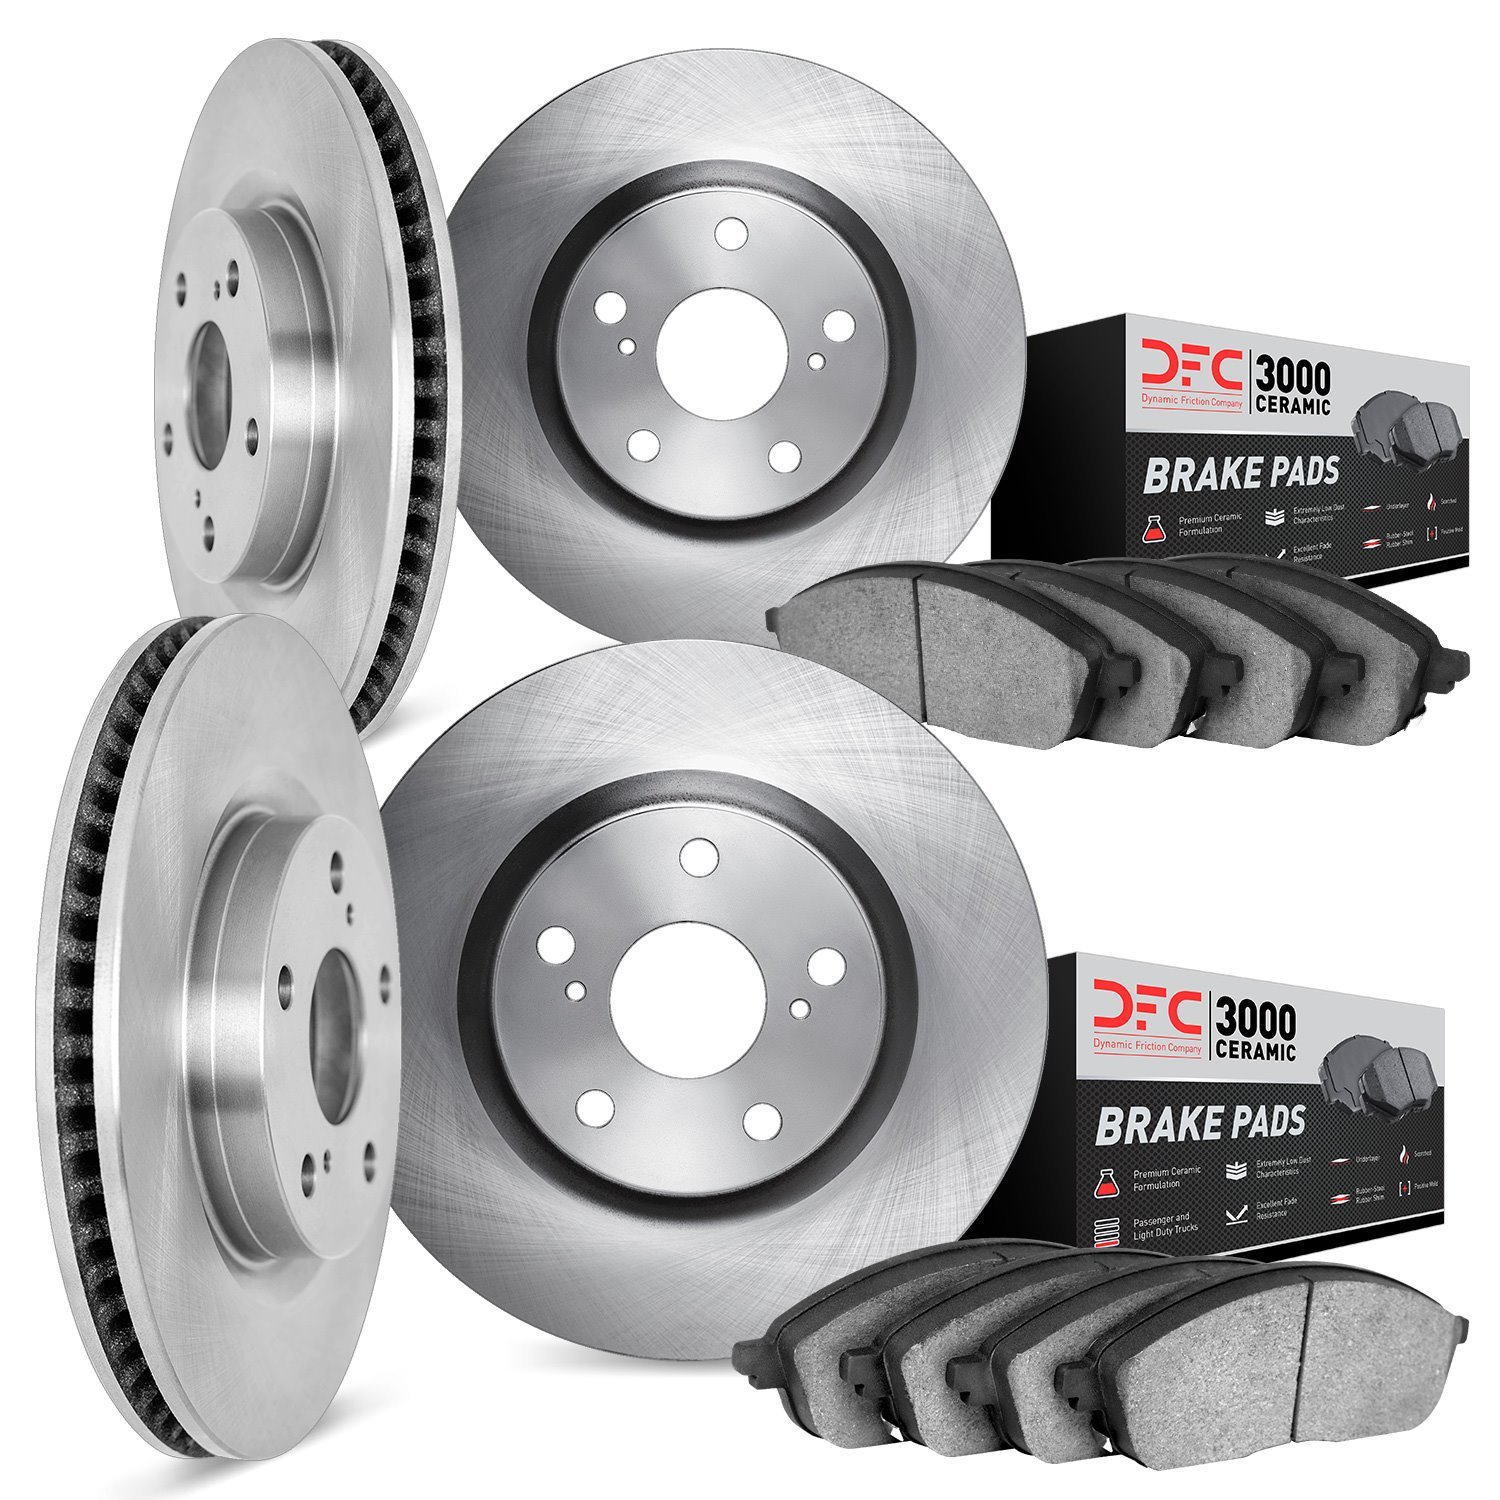 6304-39023 Brake Rotors with 3000-Series Ceramic Brake Pads Kit, Fits Select Mopar, Position: Front and Rear